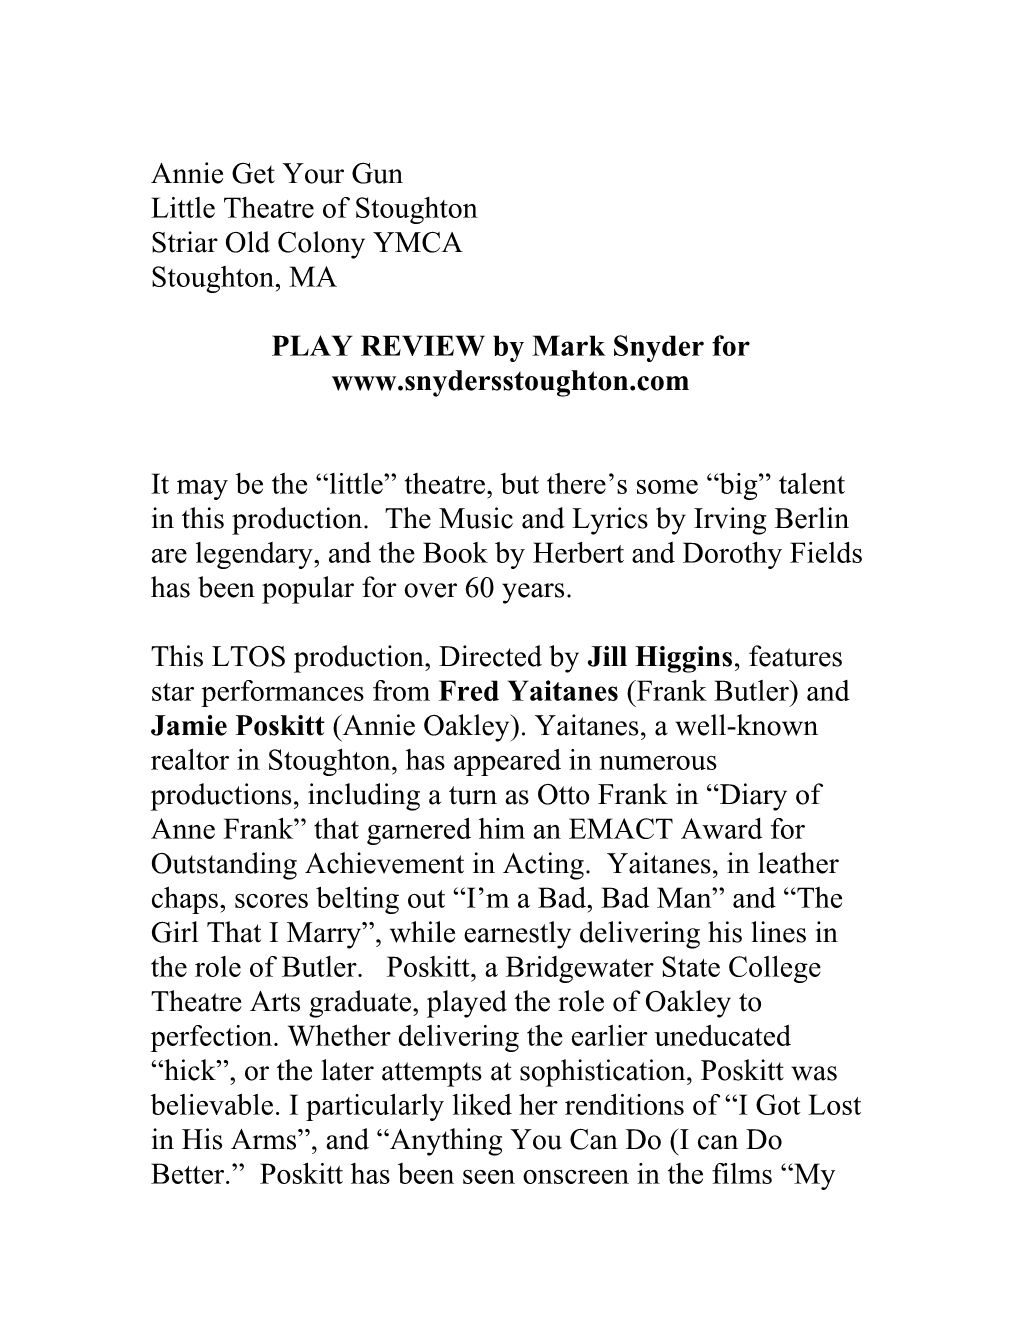 PLAY REVIEW by Mark Snyder